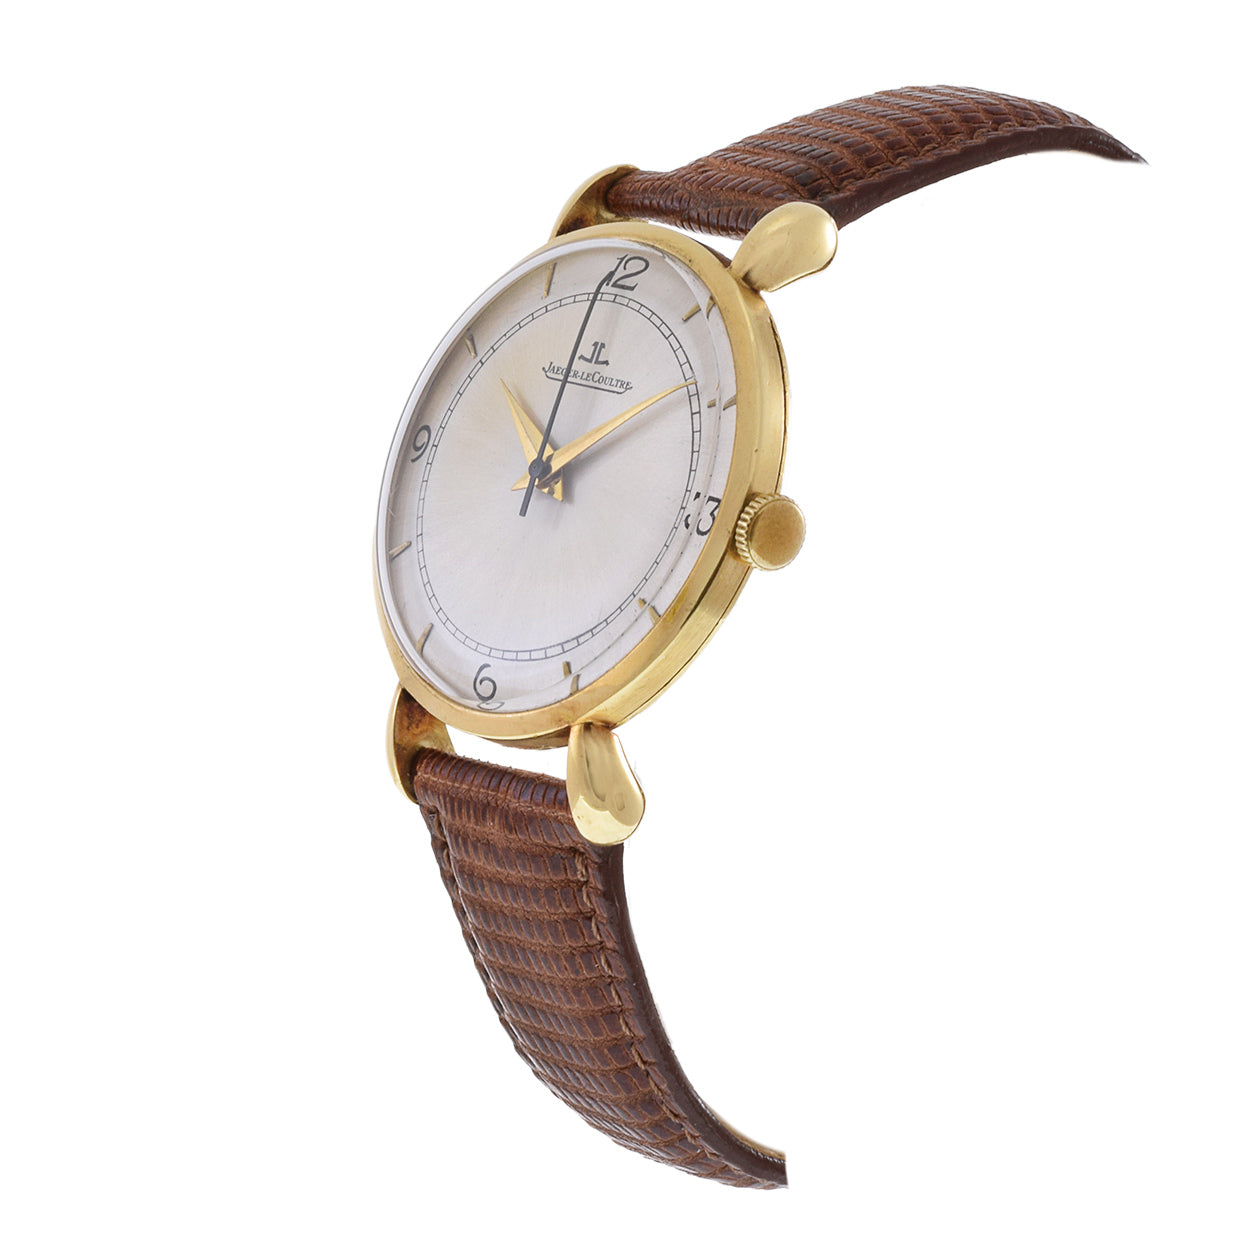 Vintage 1950's Jaeger-LeCoultre 18KT Yellow Gold Watch